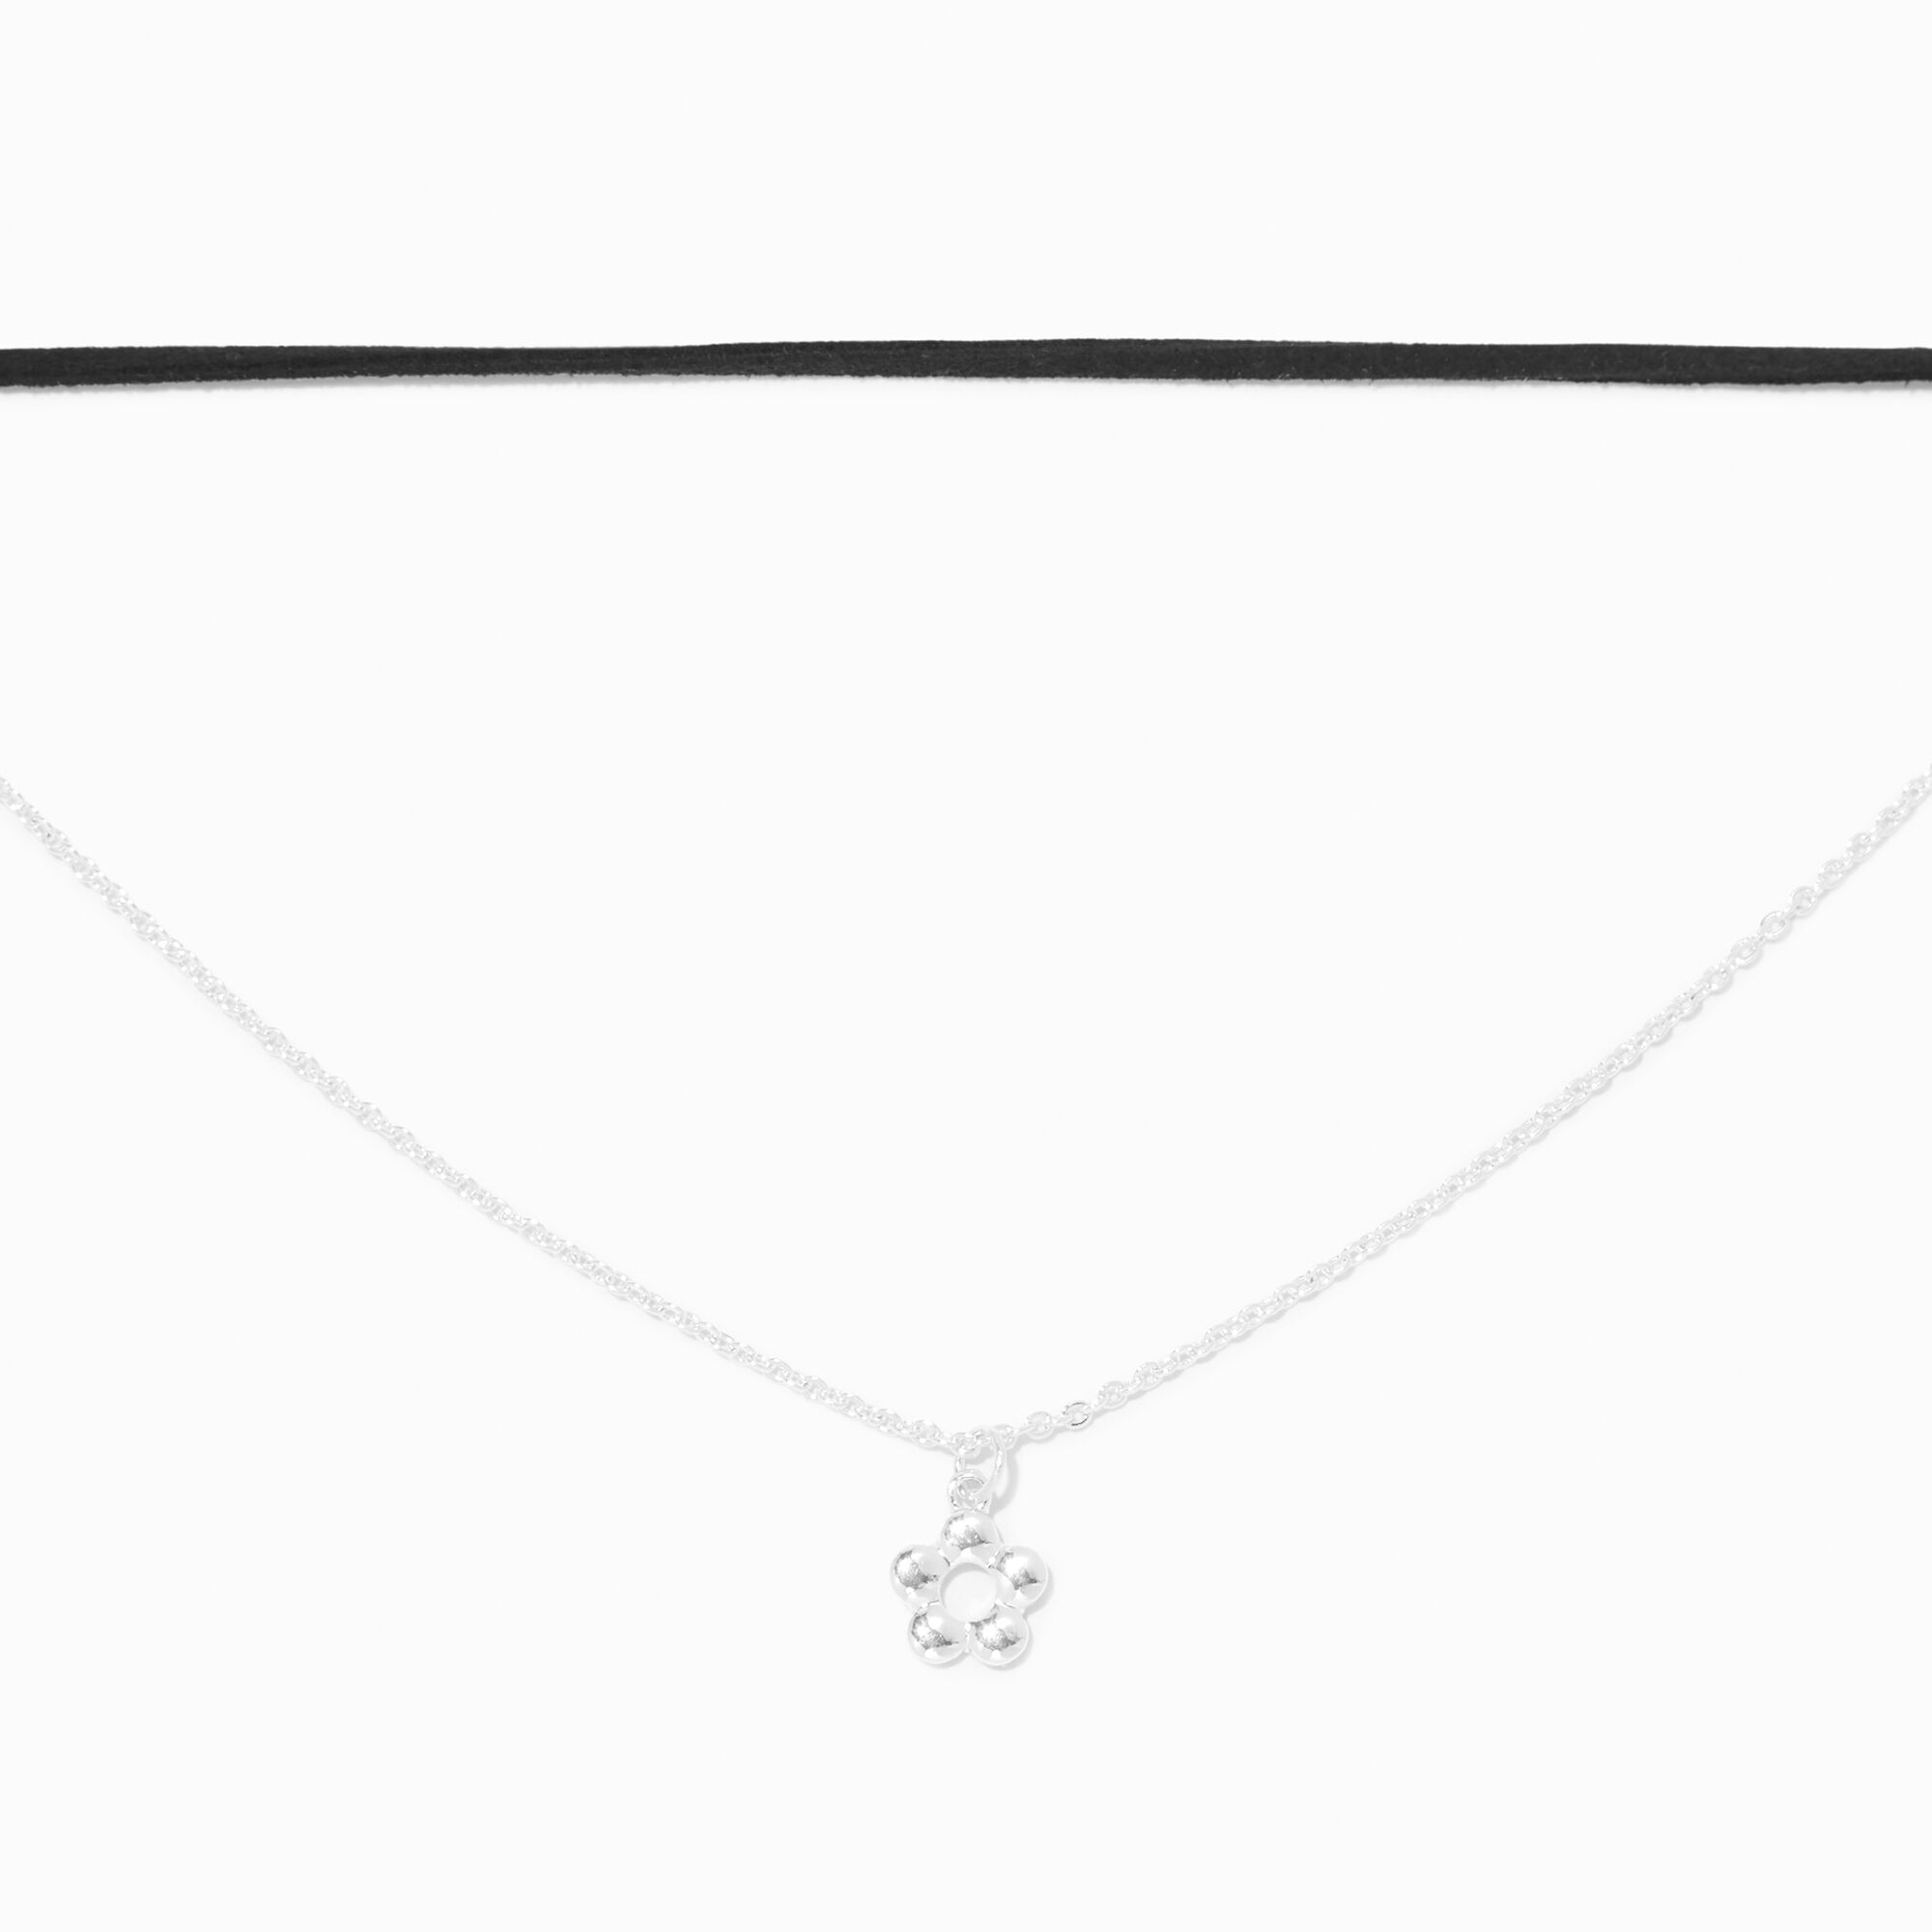 View Claires SilverTone Daisy Pendant Choker Necklace 2 Pack Black information